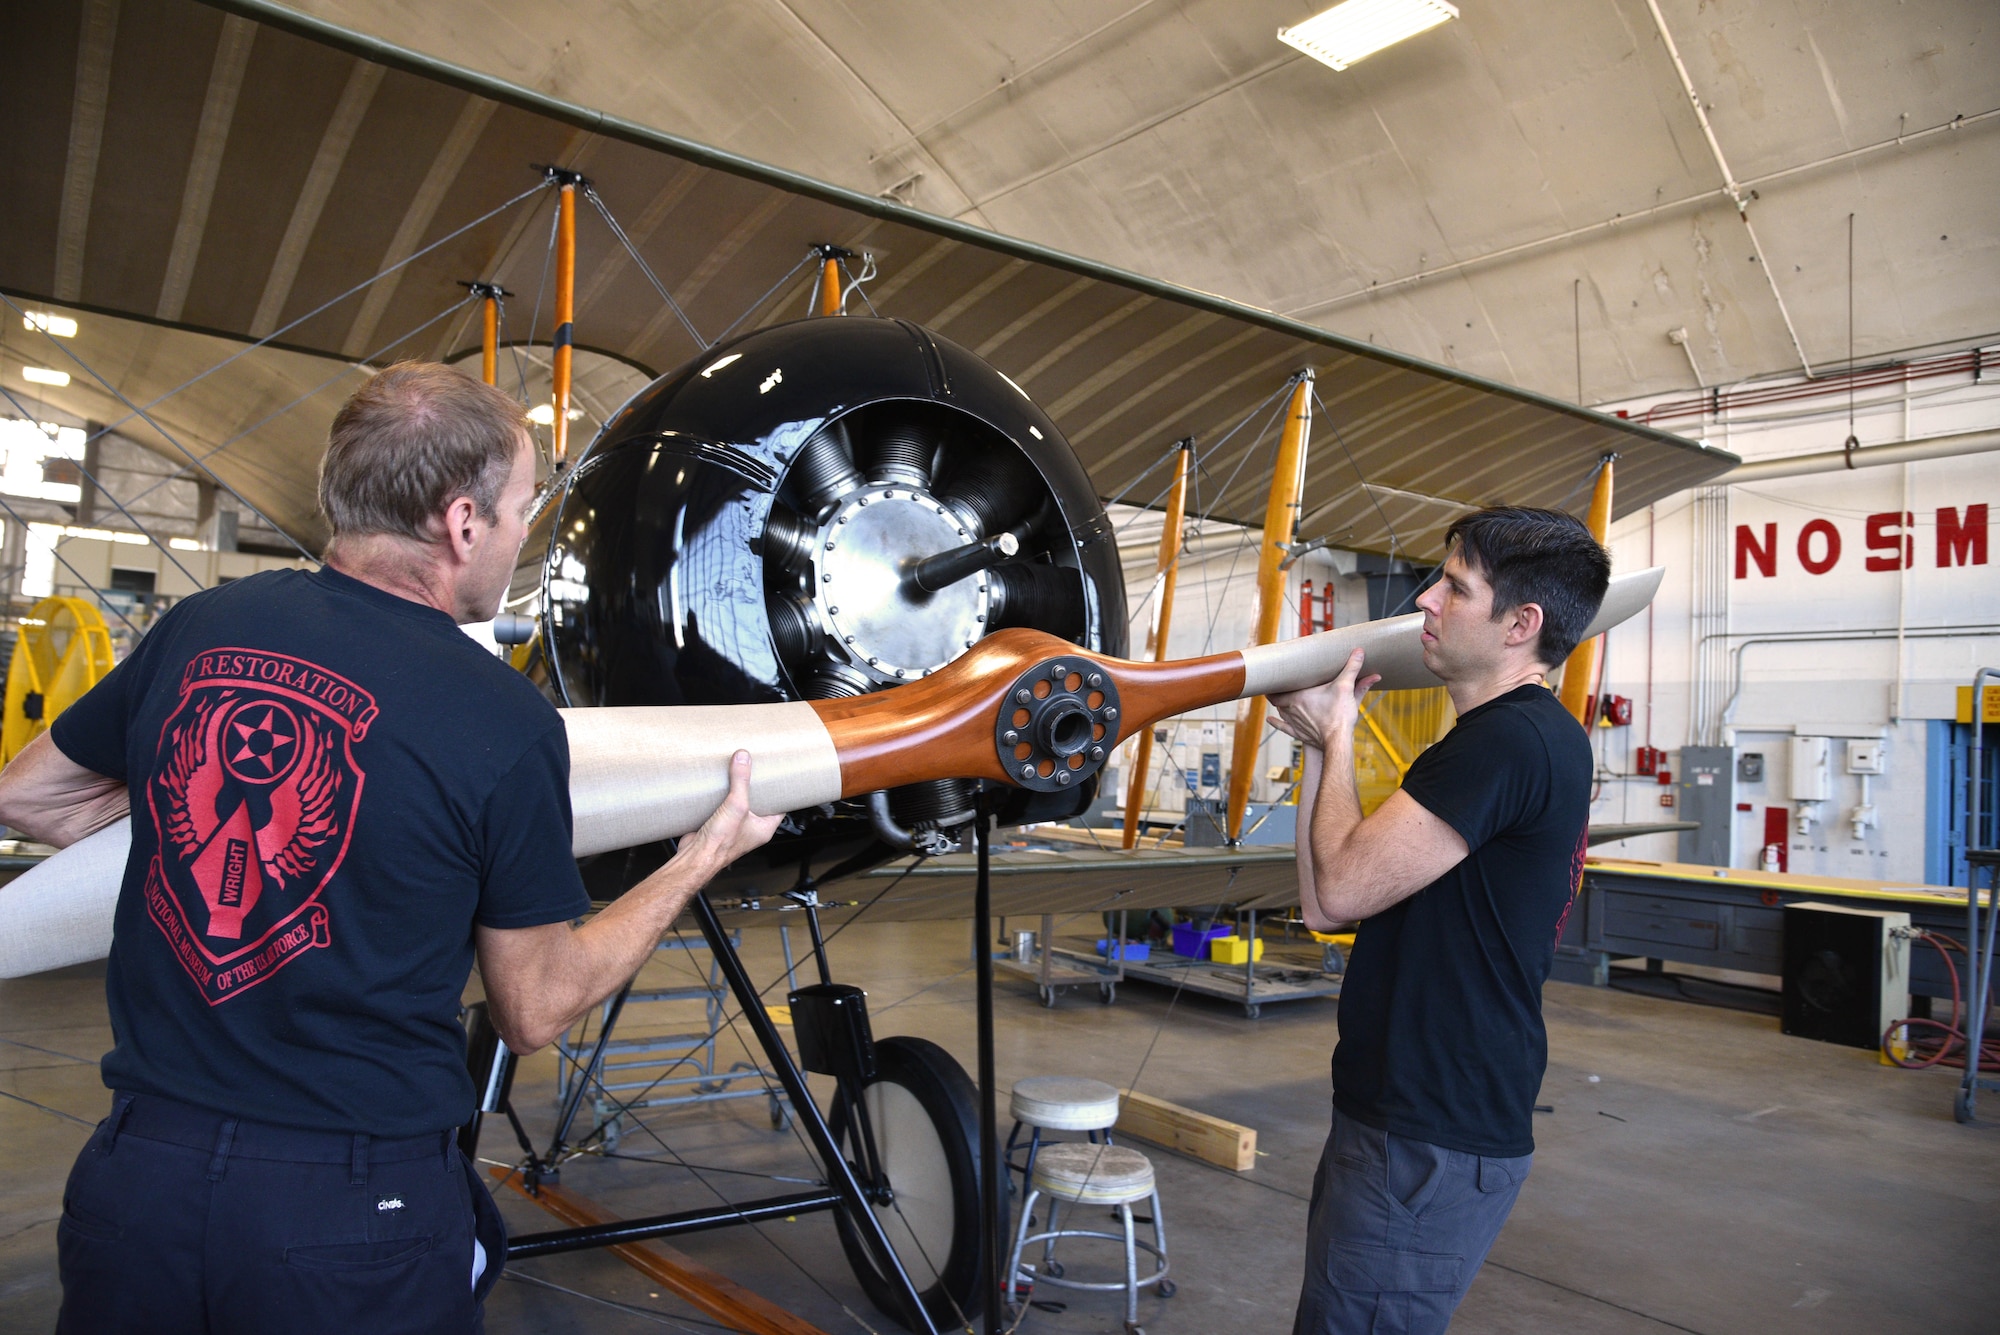 Aircraft view of propeller of a biplane in restoration.